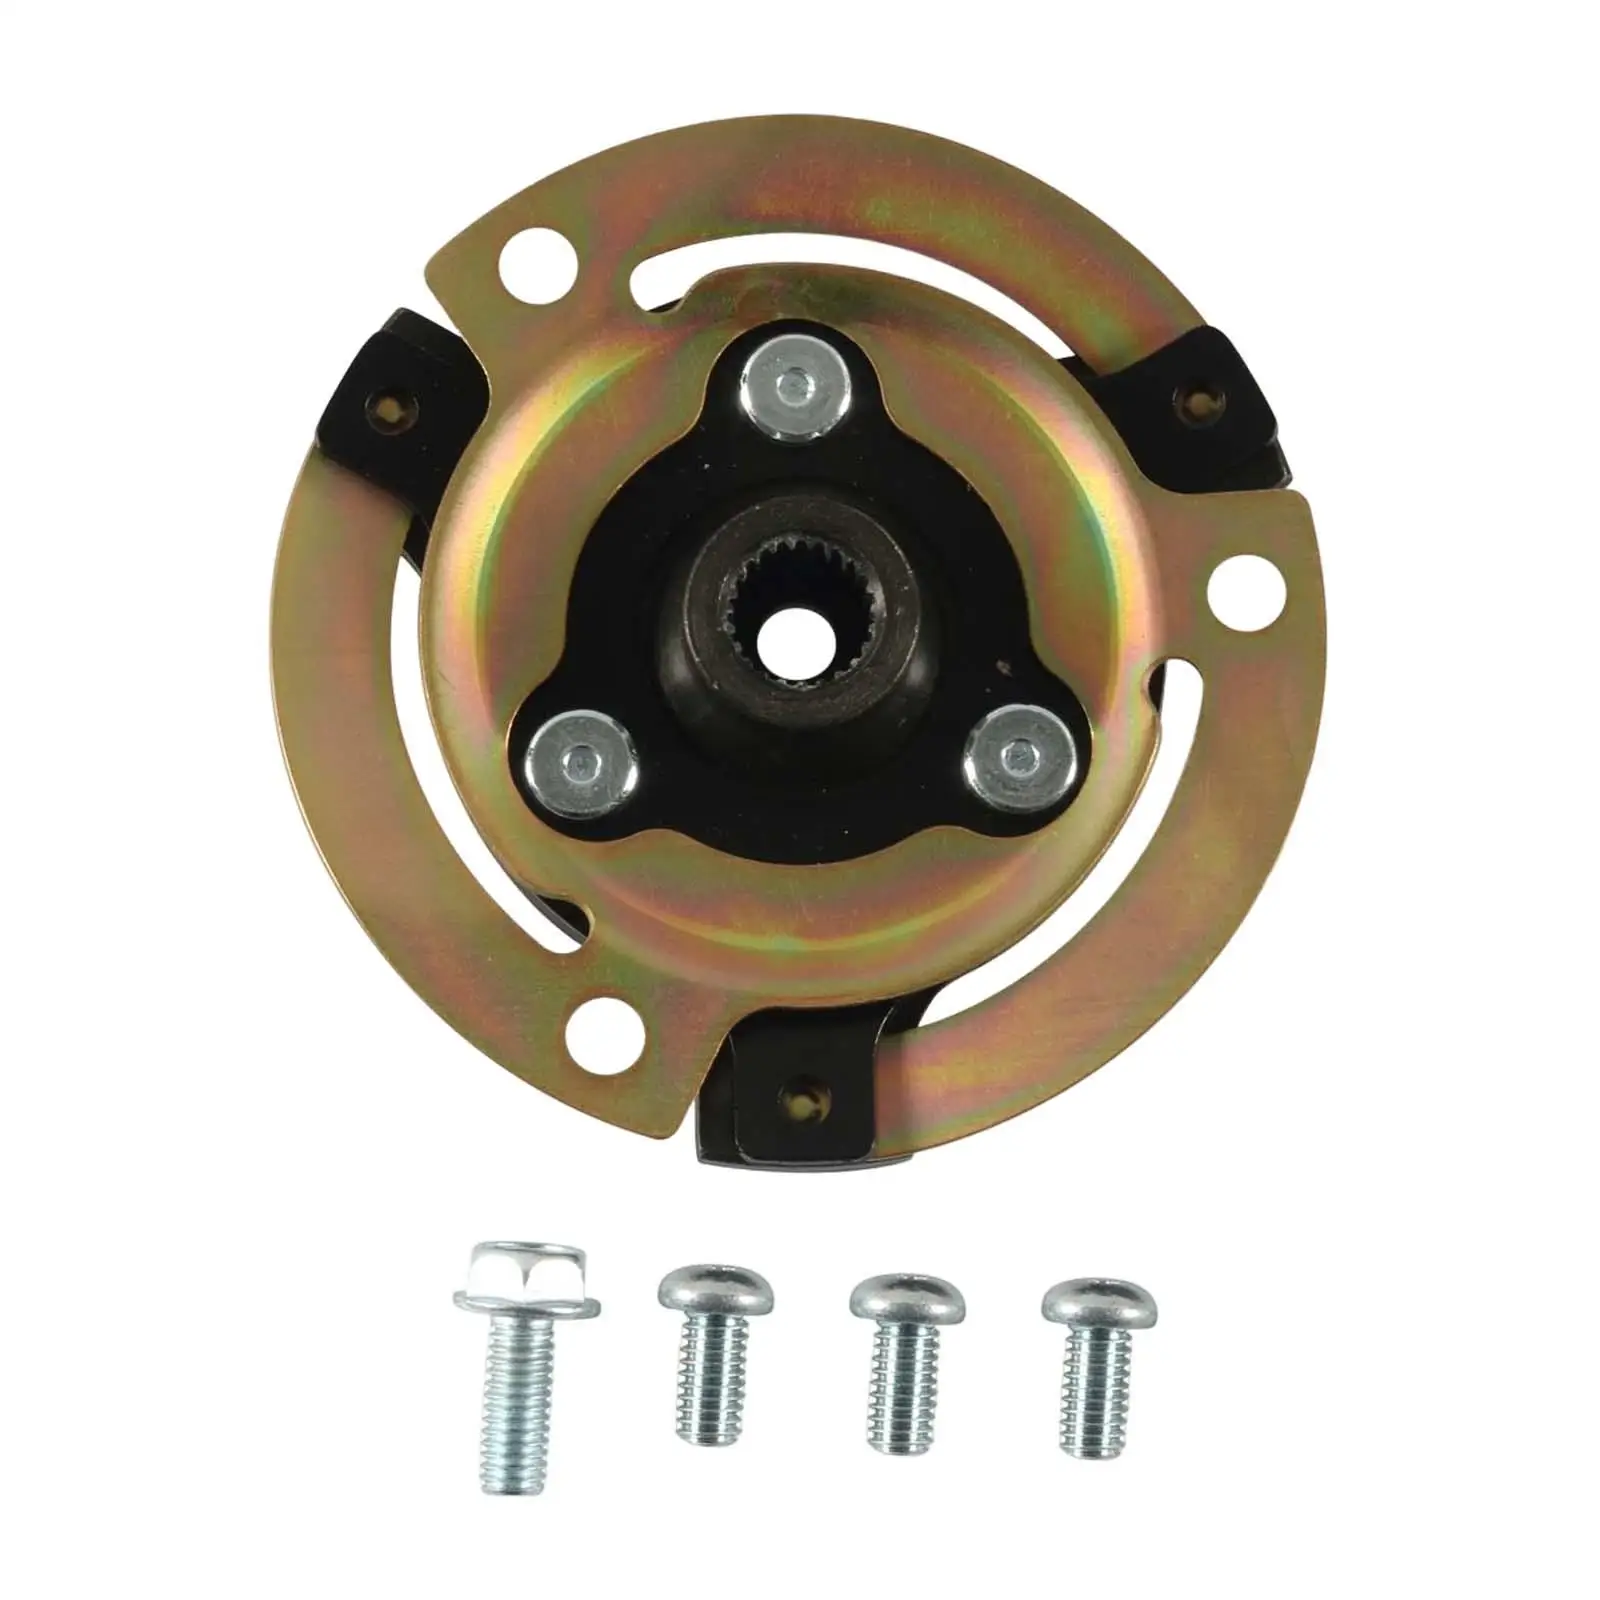 Auto A/C Air Conditioning Compressor Repair Kit 5N0820803B Clutch Hub with Bolts Pulley Clutch for VW Golf